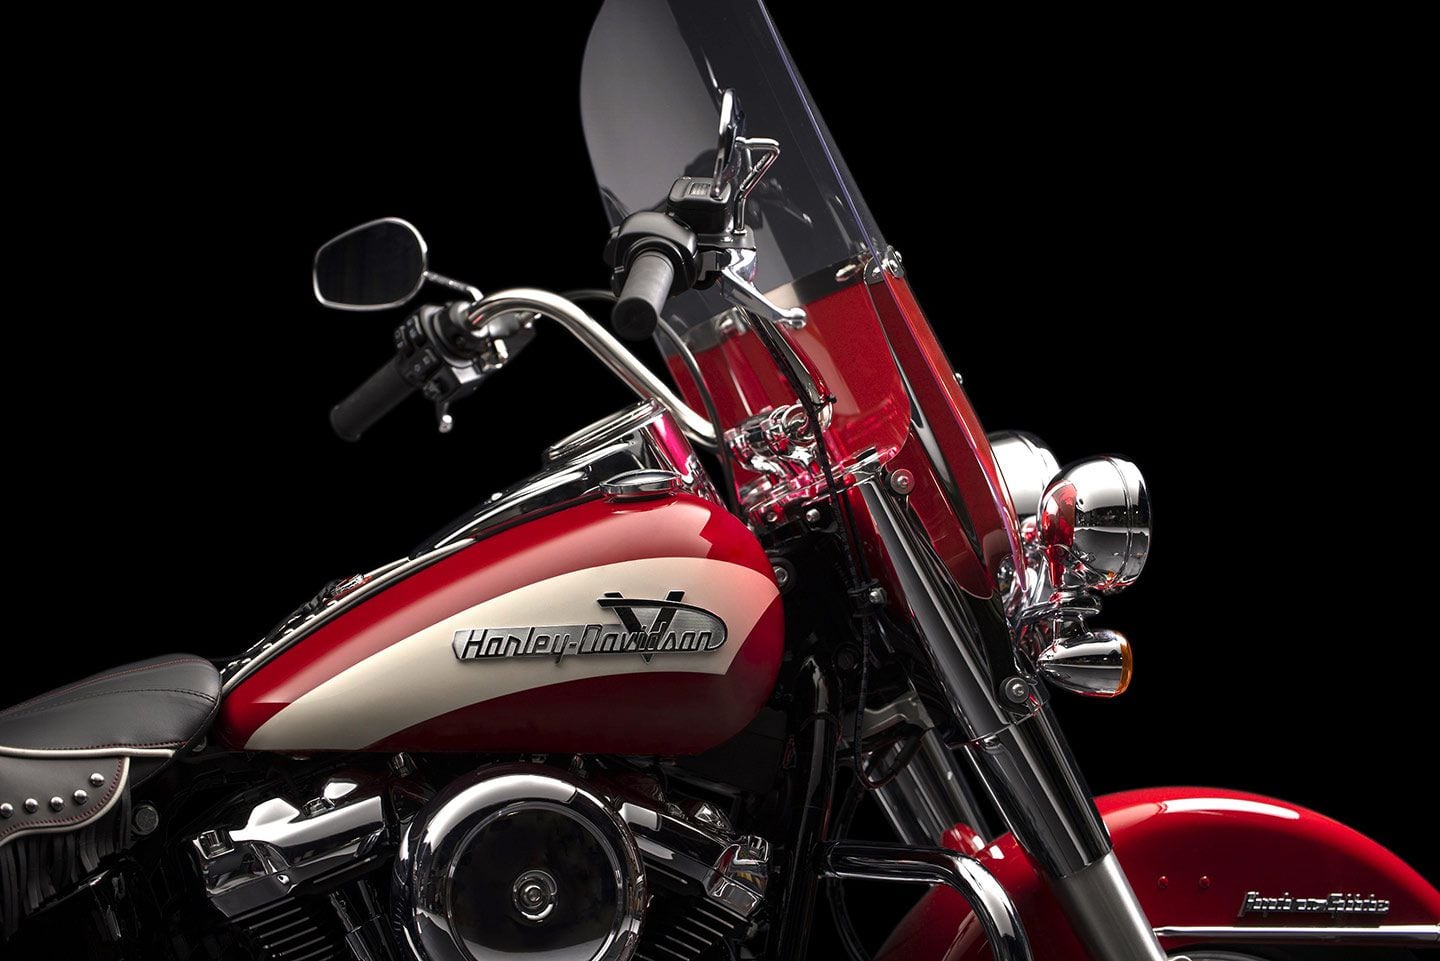 No 74ci panhead here: You get a  counterbalanced Milwaukee-Eight 114 V-twin engine tuned with a Screamin’ Eagle High-Flow air cleaner propelling the 2024 Hydra-Glide Revival.